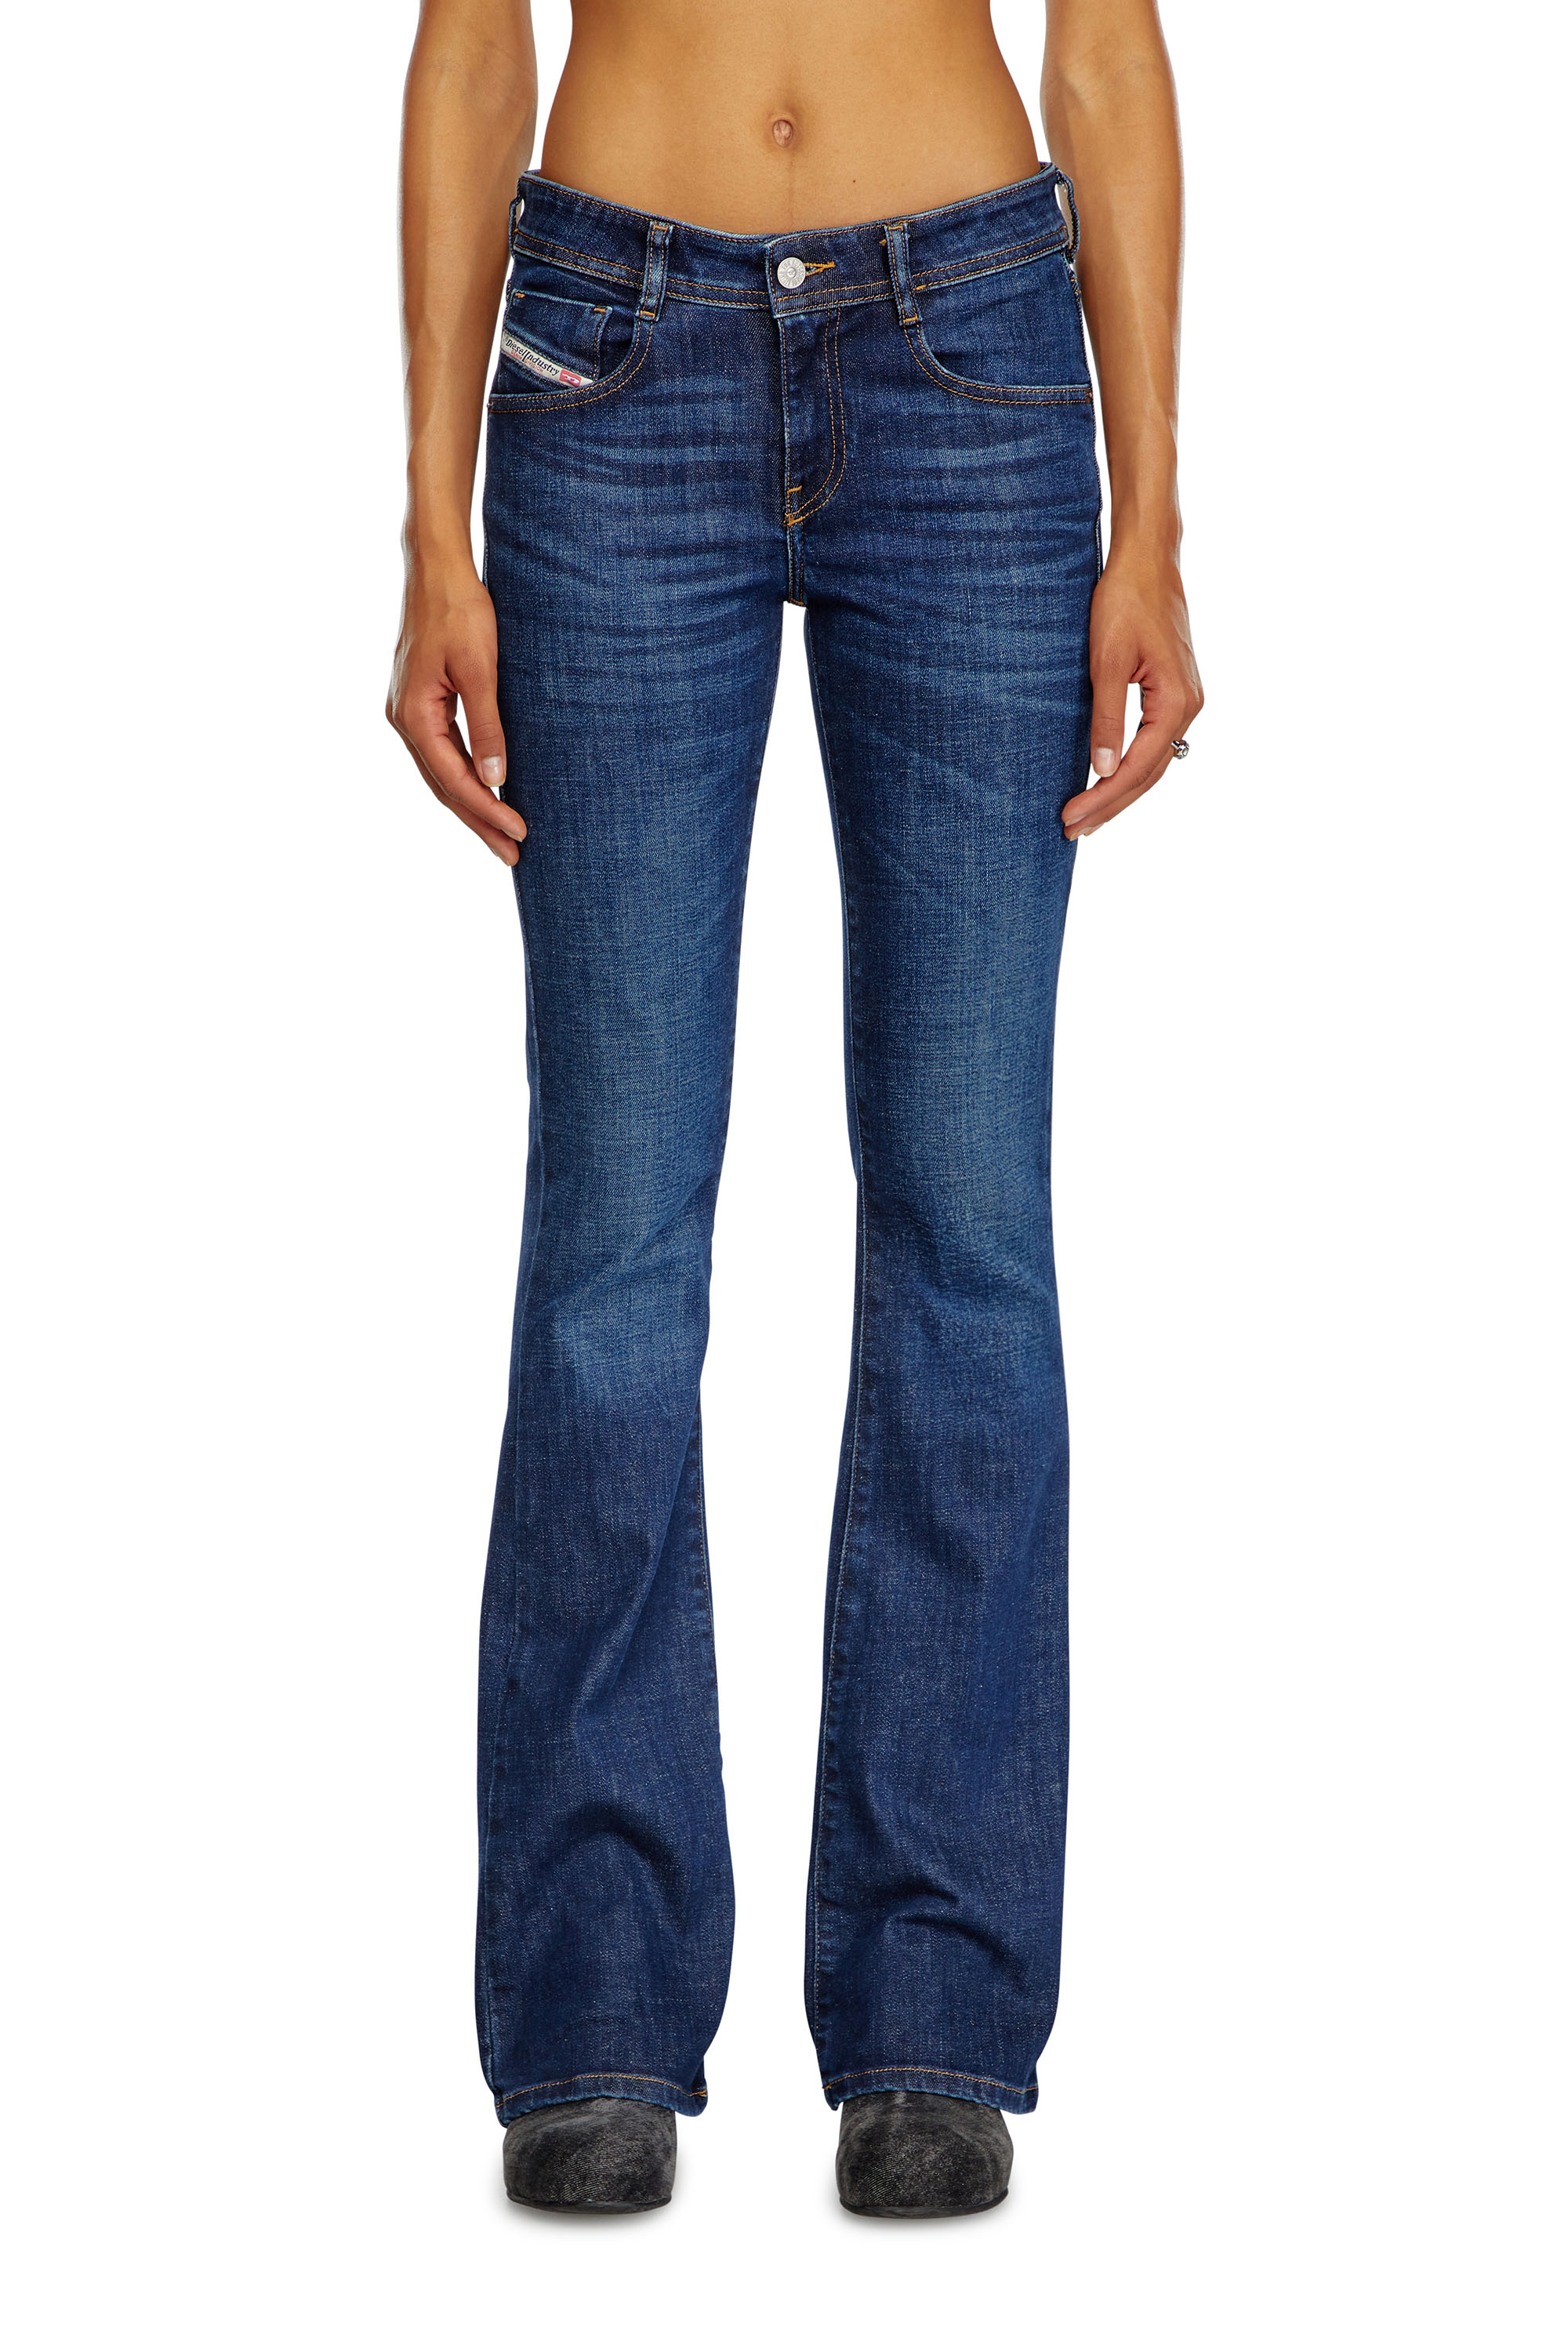 1969 D-EBBEY 09B90 Bootcut and Flare Jeans, Azul Oscuro - Vaqueros